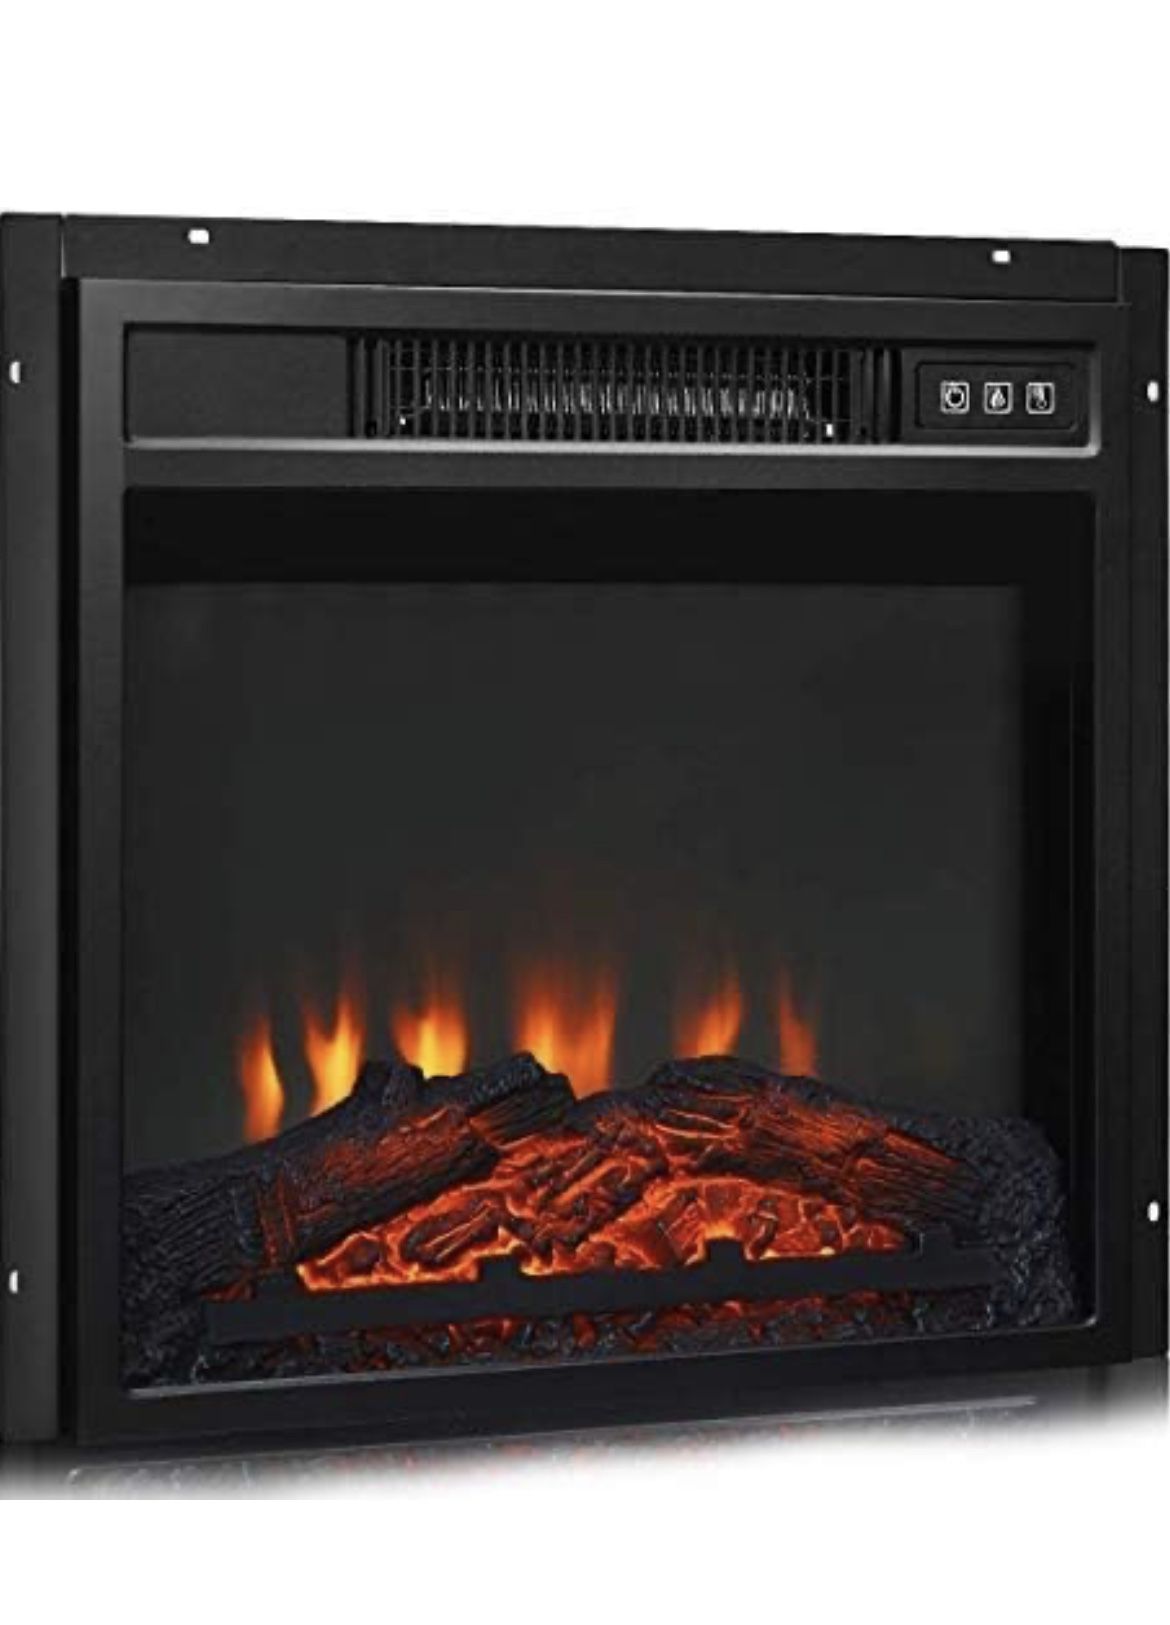 18" Electric Fireplace Heater for TV Stand, Recessed 1400 W Electric Stove Heater